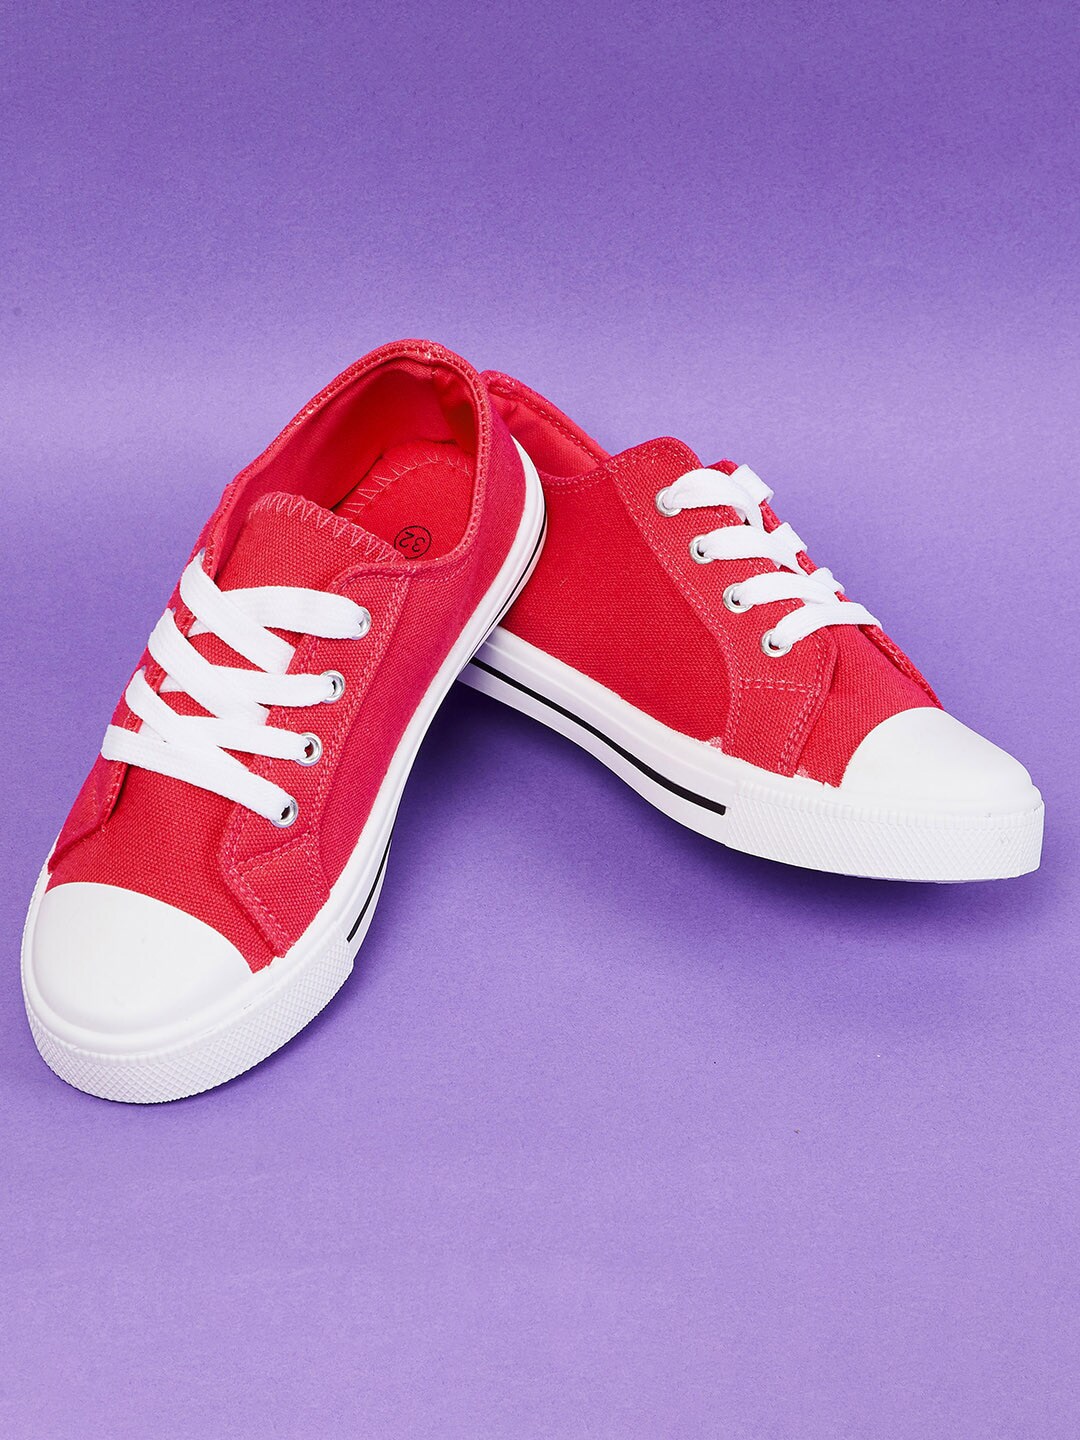 max Girls Woven Design Canvas Lace Up Sneakers